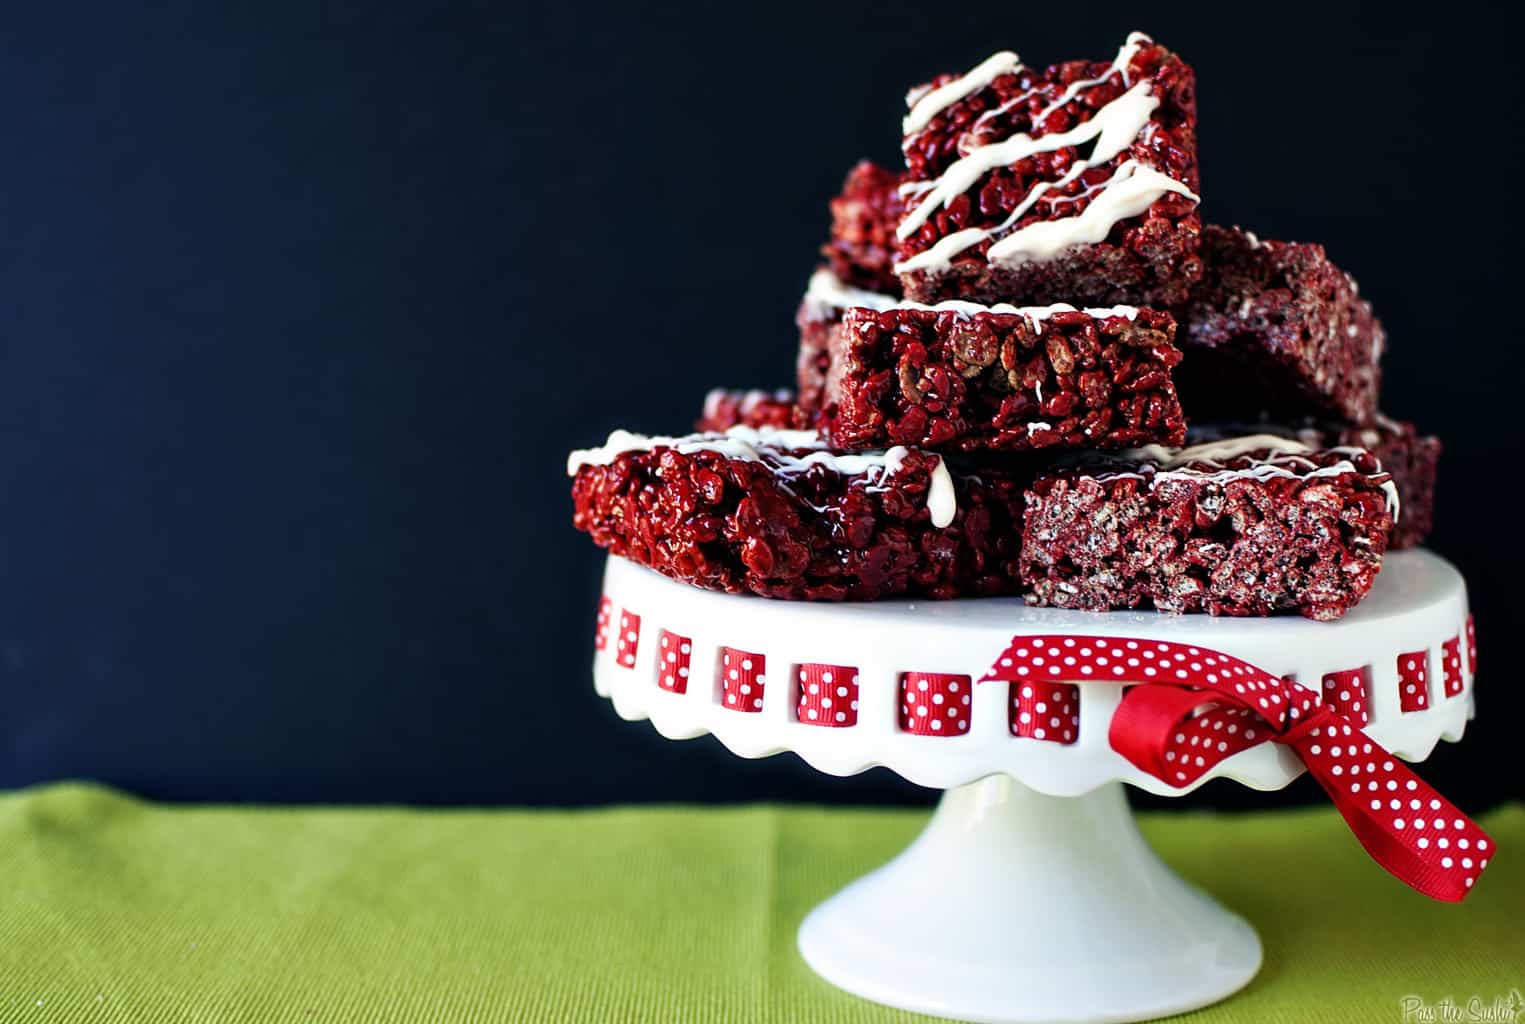 Red velvet krispy treats are a chocolaty version of classic rice Krispies treats. Festive enough for the holidays, but delicious enough to eat any time of the year.